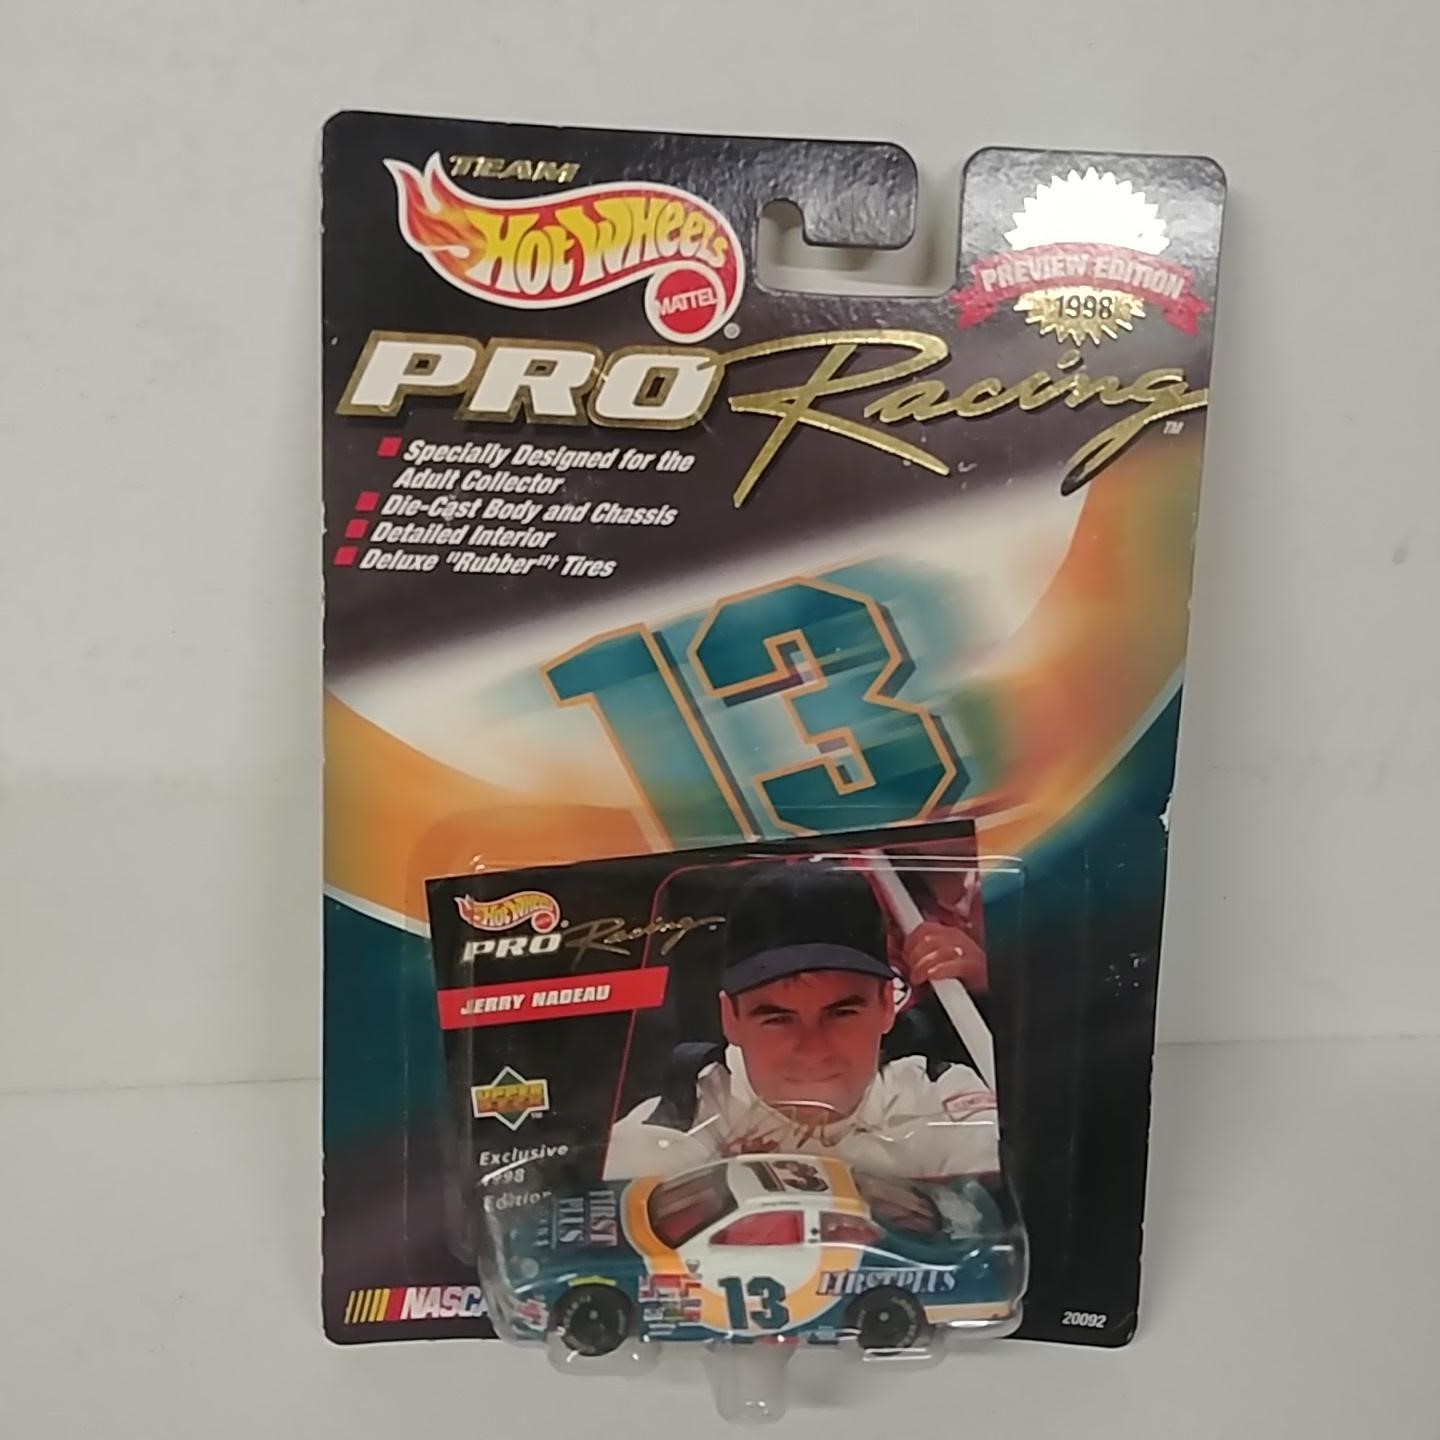 1998 Jerry Nadeau 1/64th First Plus Loans "Preview Edition" car